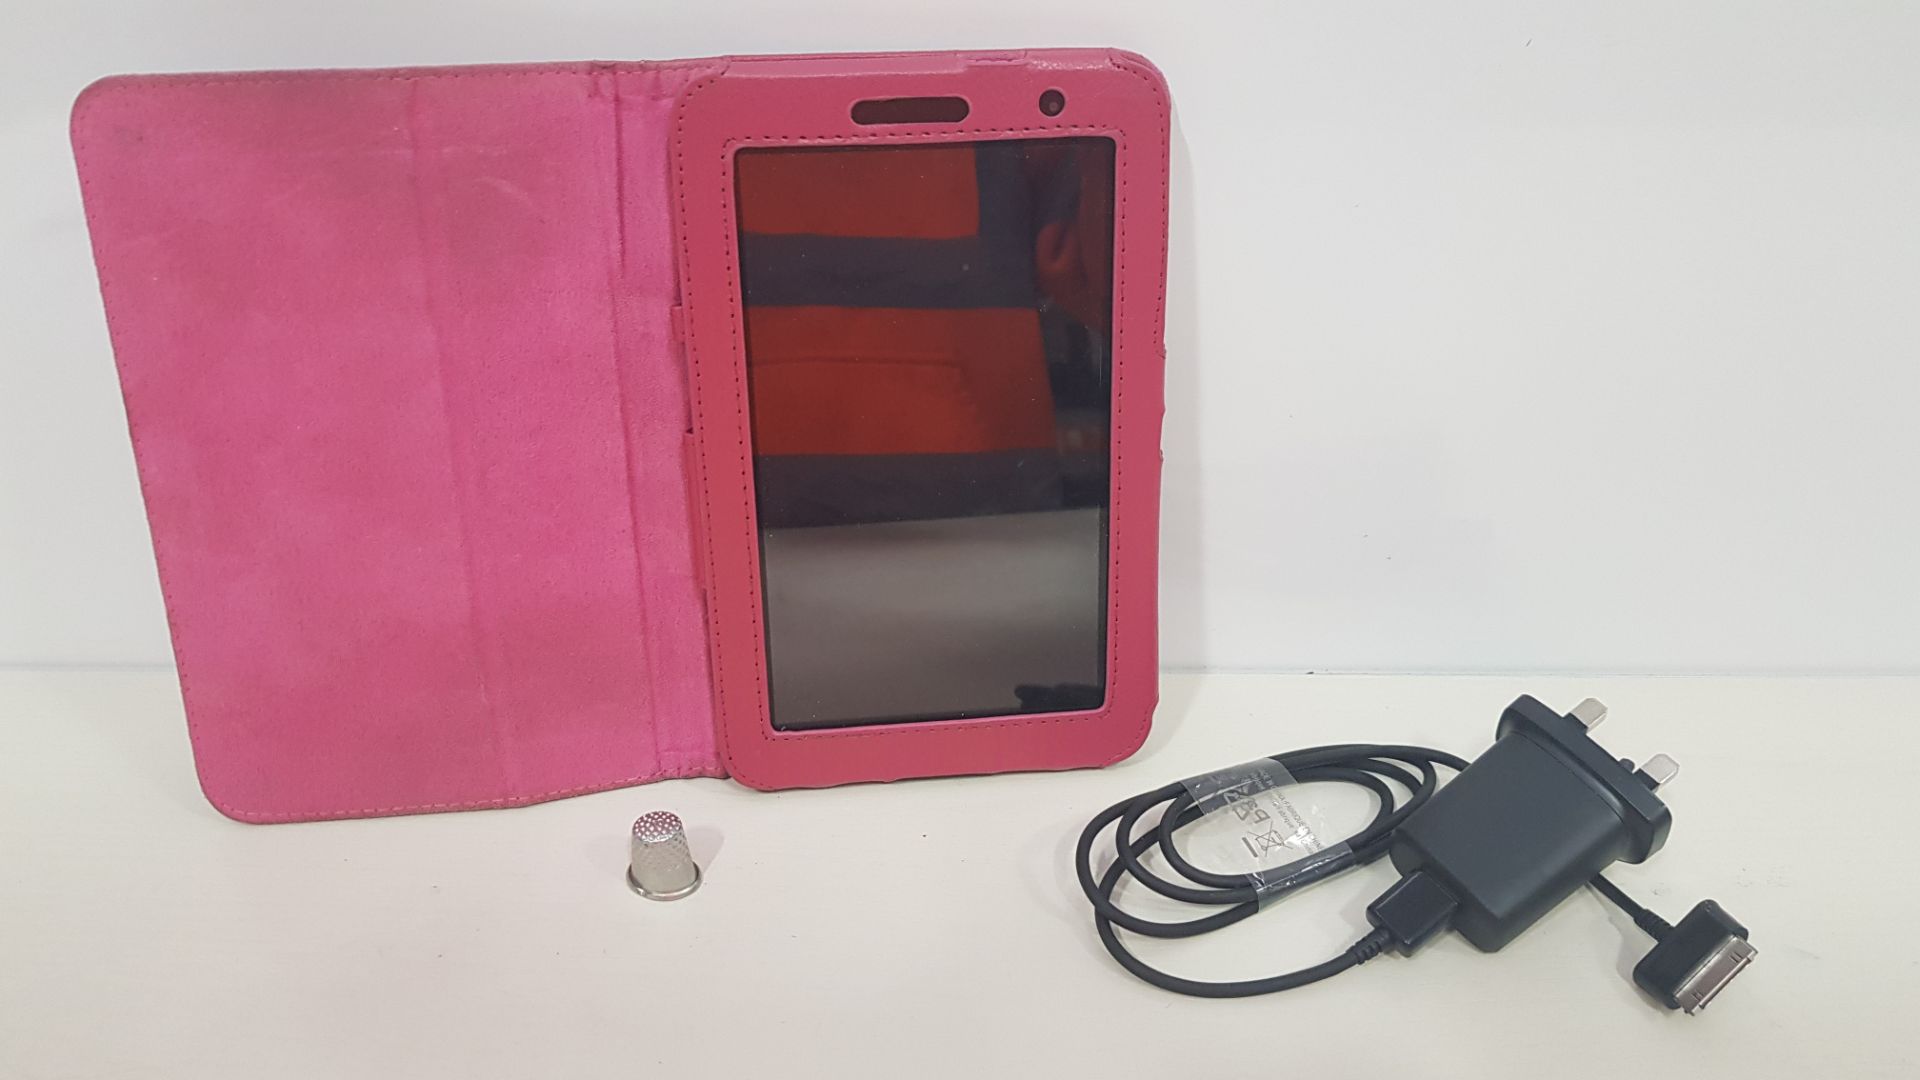 SAMSUNG GALAXY TABLET INCLUDES A CASE AND CHARGER